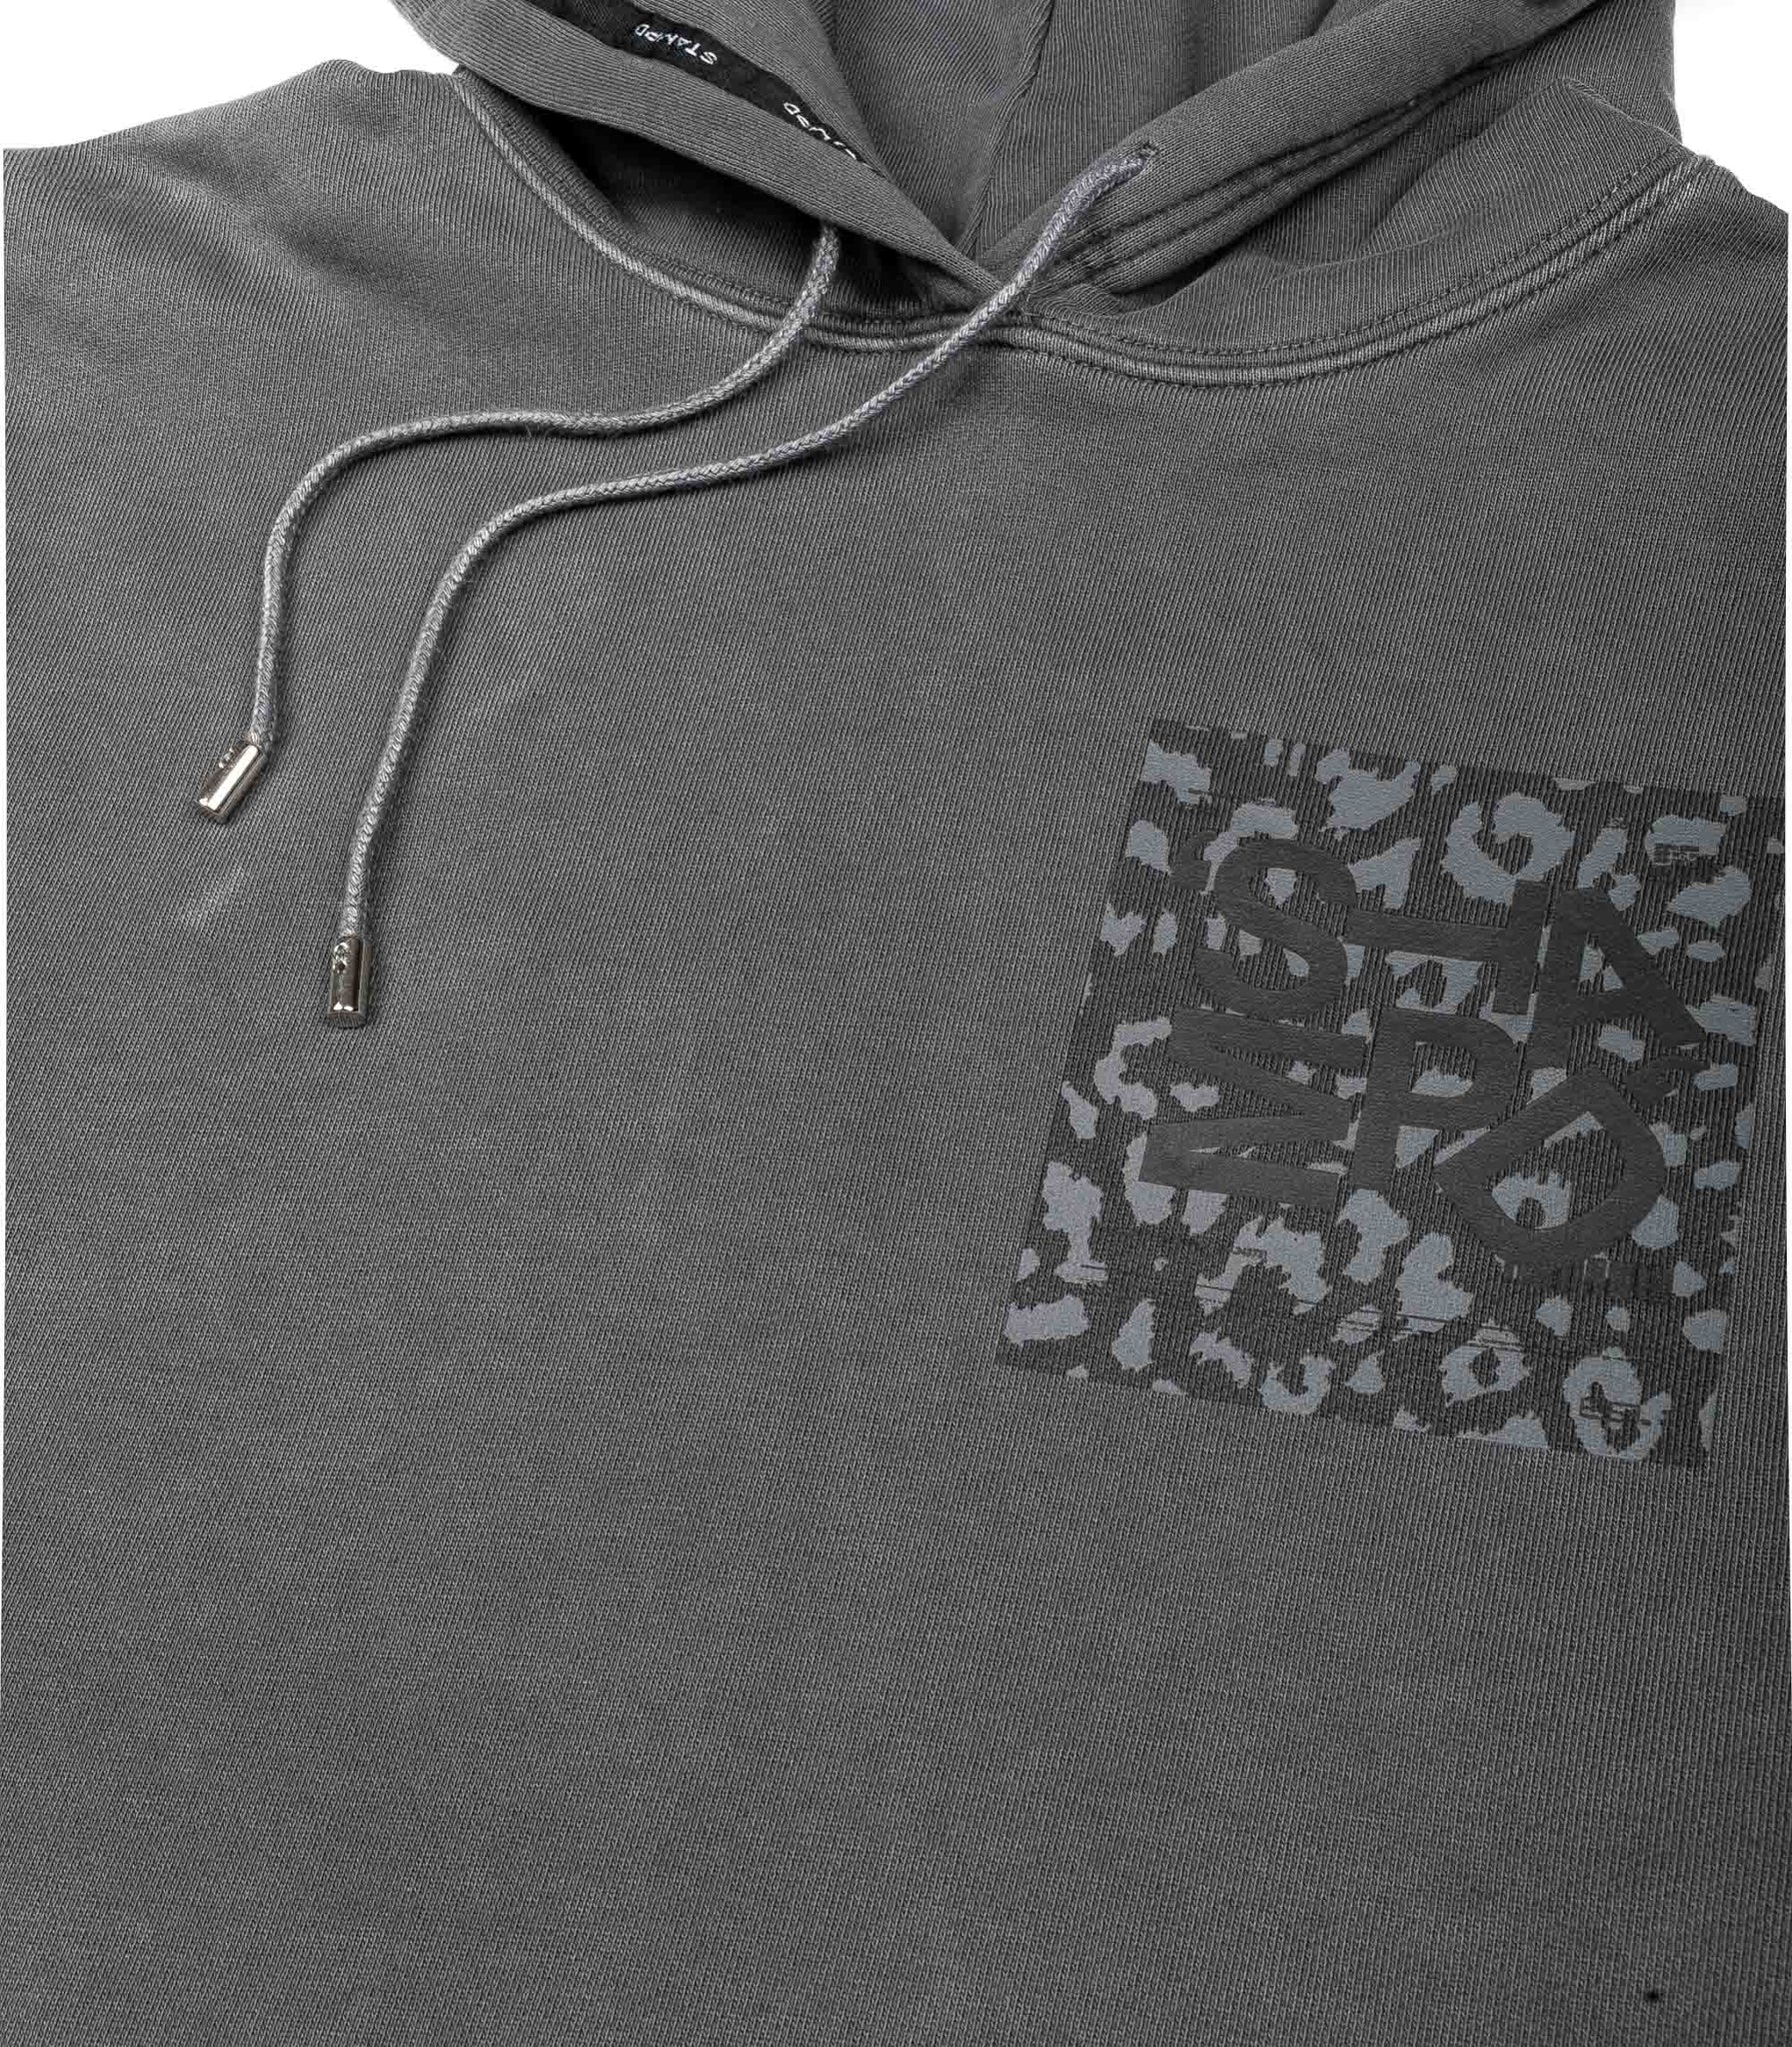 Stampd Tumbled Shadow Leopard Gray Hooded Sweatshirt For Men